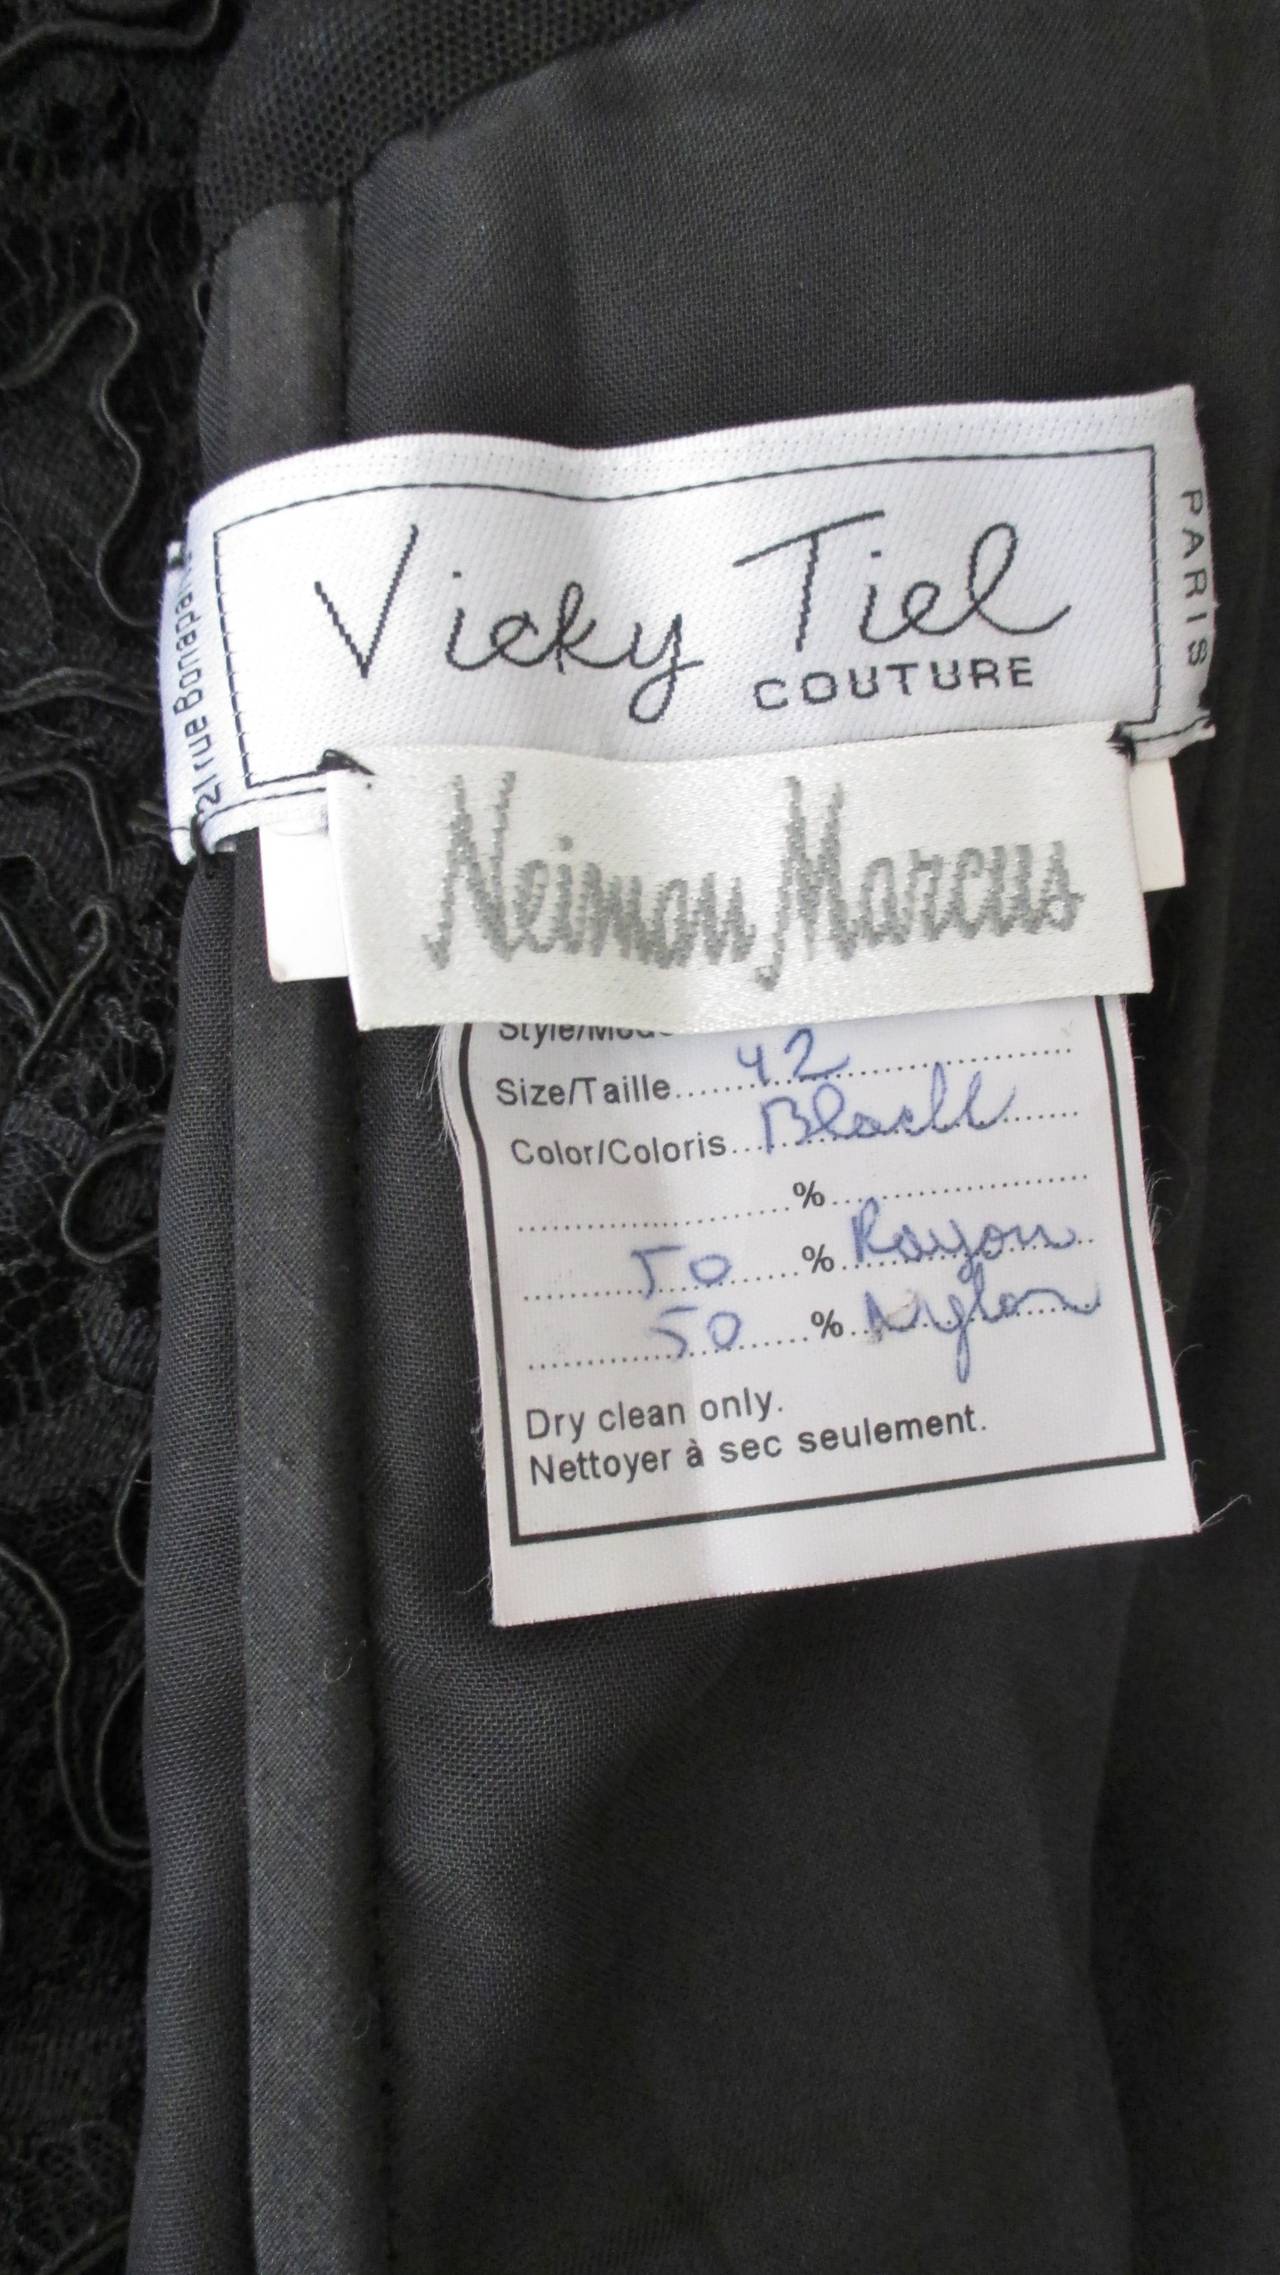 Vicky Tiel Couture Bustier Dress Gown 1980s For Sale 4